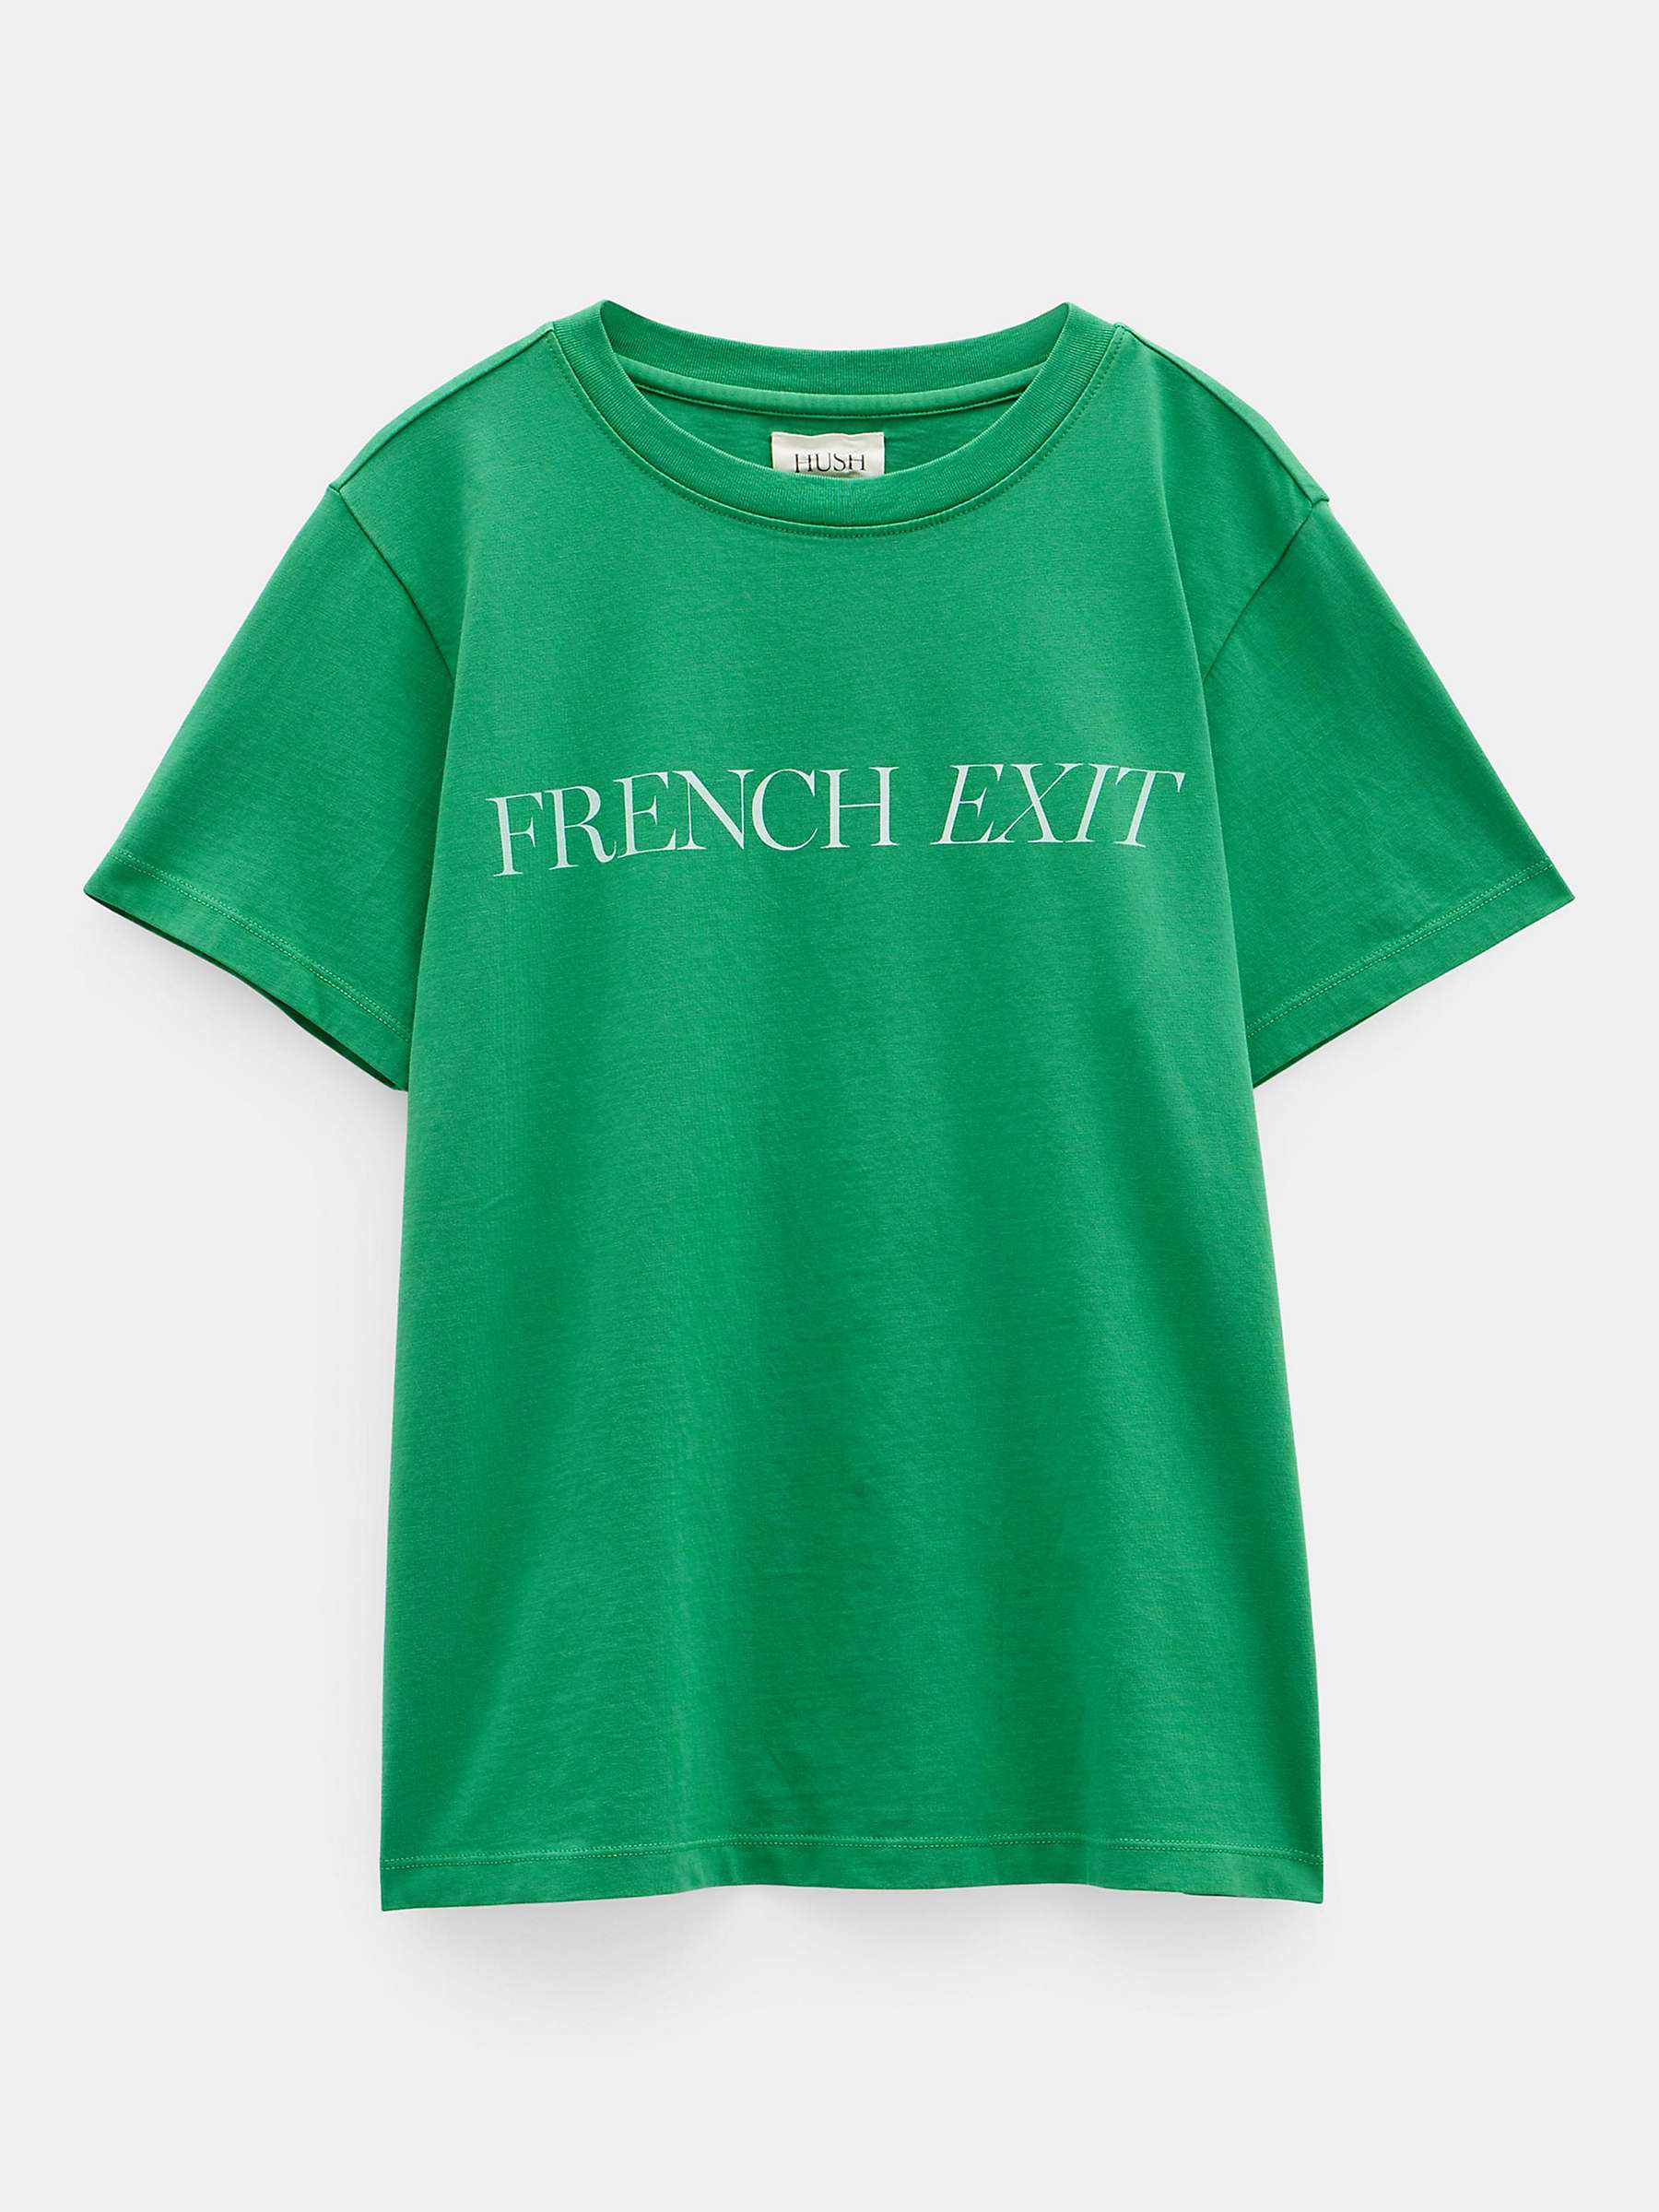 Buy HUSH French Exit Cotton T-Shirt, Green Online at johnlewis.com